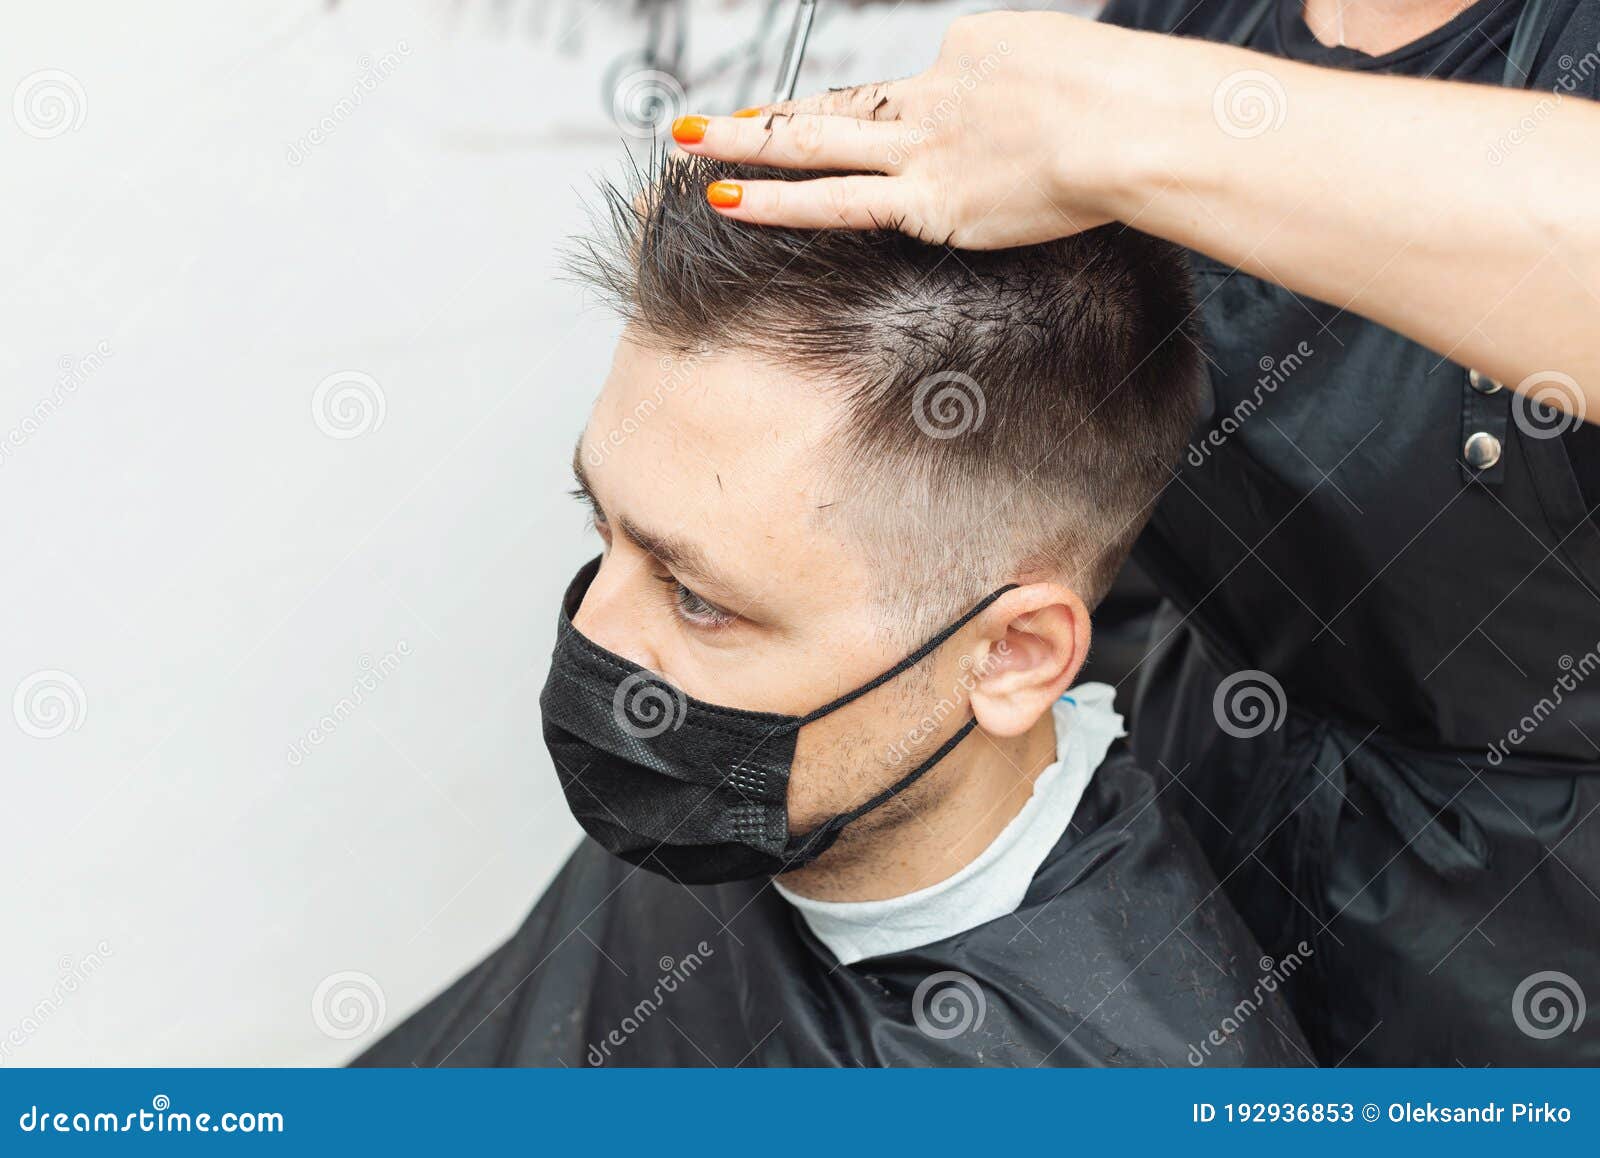 Hair Cutting during Pandemic. Client in Protective Face Mask during Hair Cut  Stock Image - Image of adult, lifestyle: 192936853